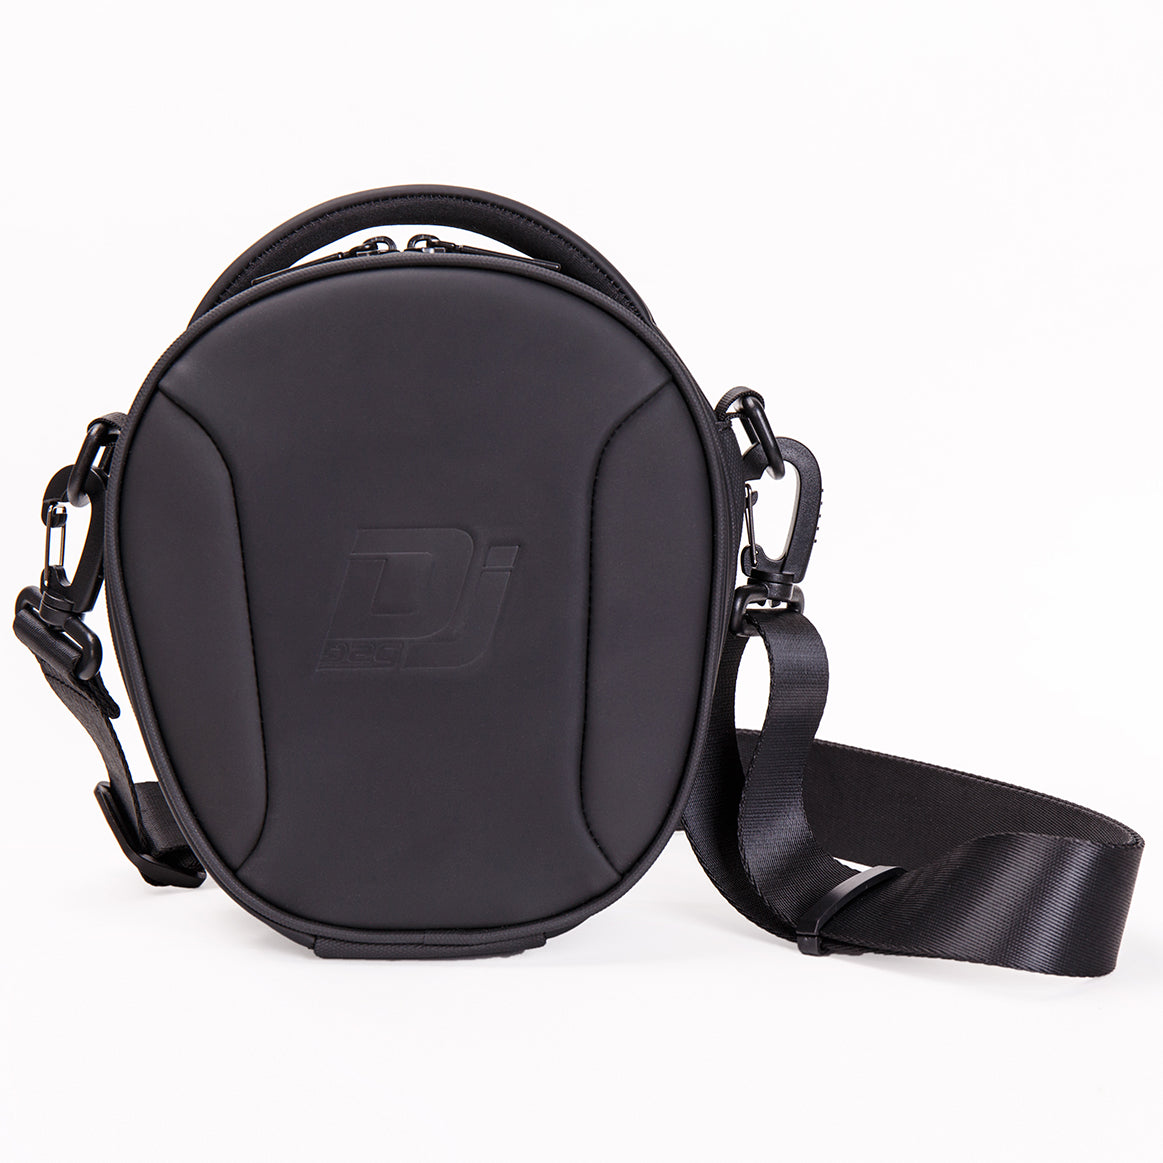 DJBAG HP SLIM Headphones without front pocket, int. 8.26 x 7.08 x 2.54in